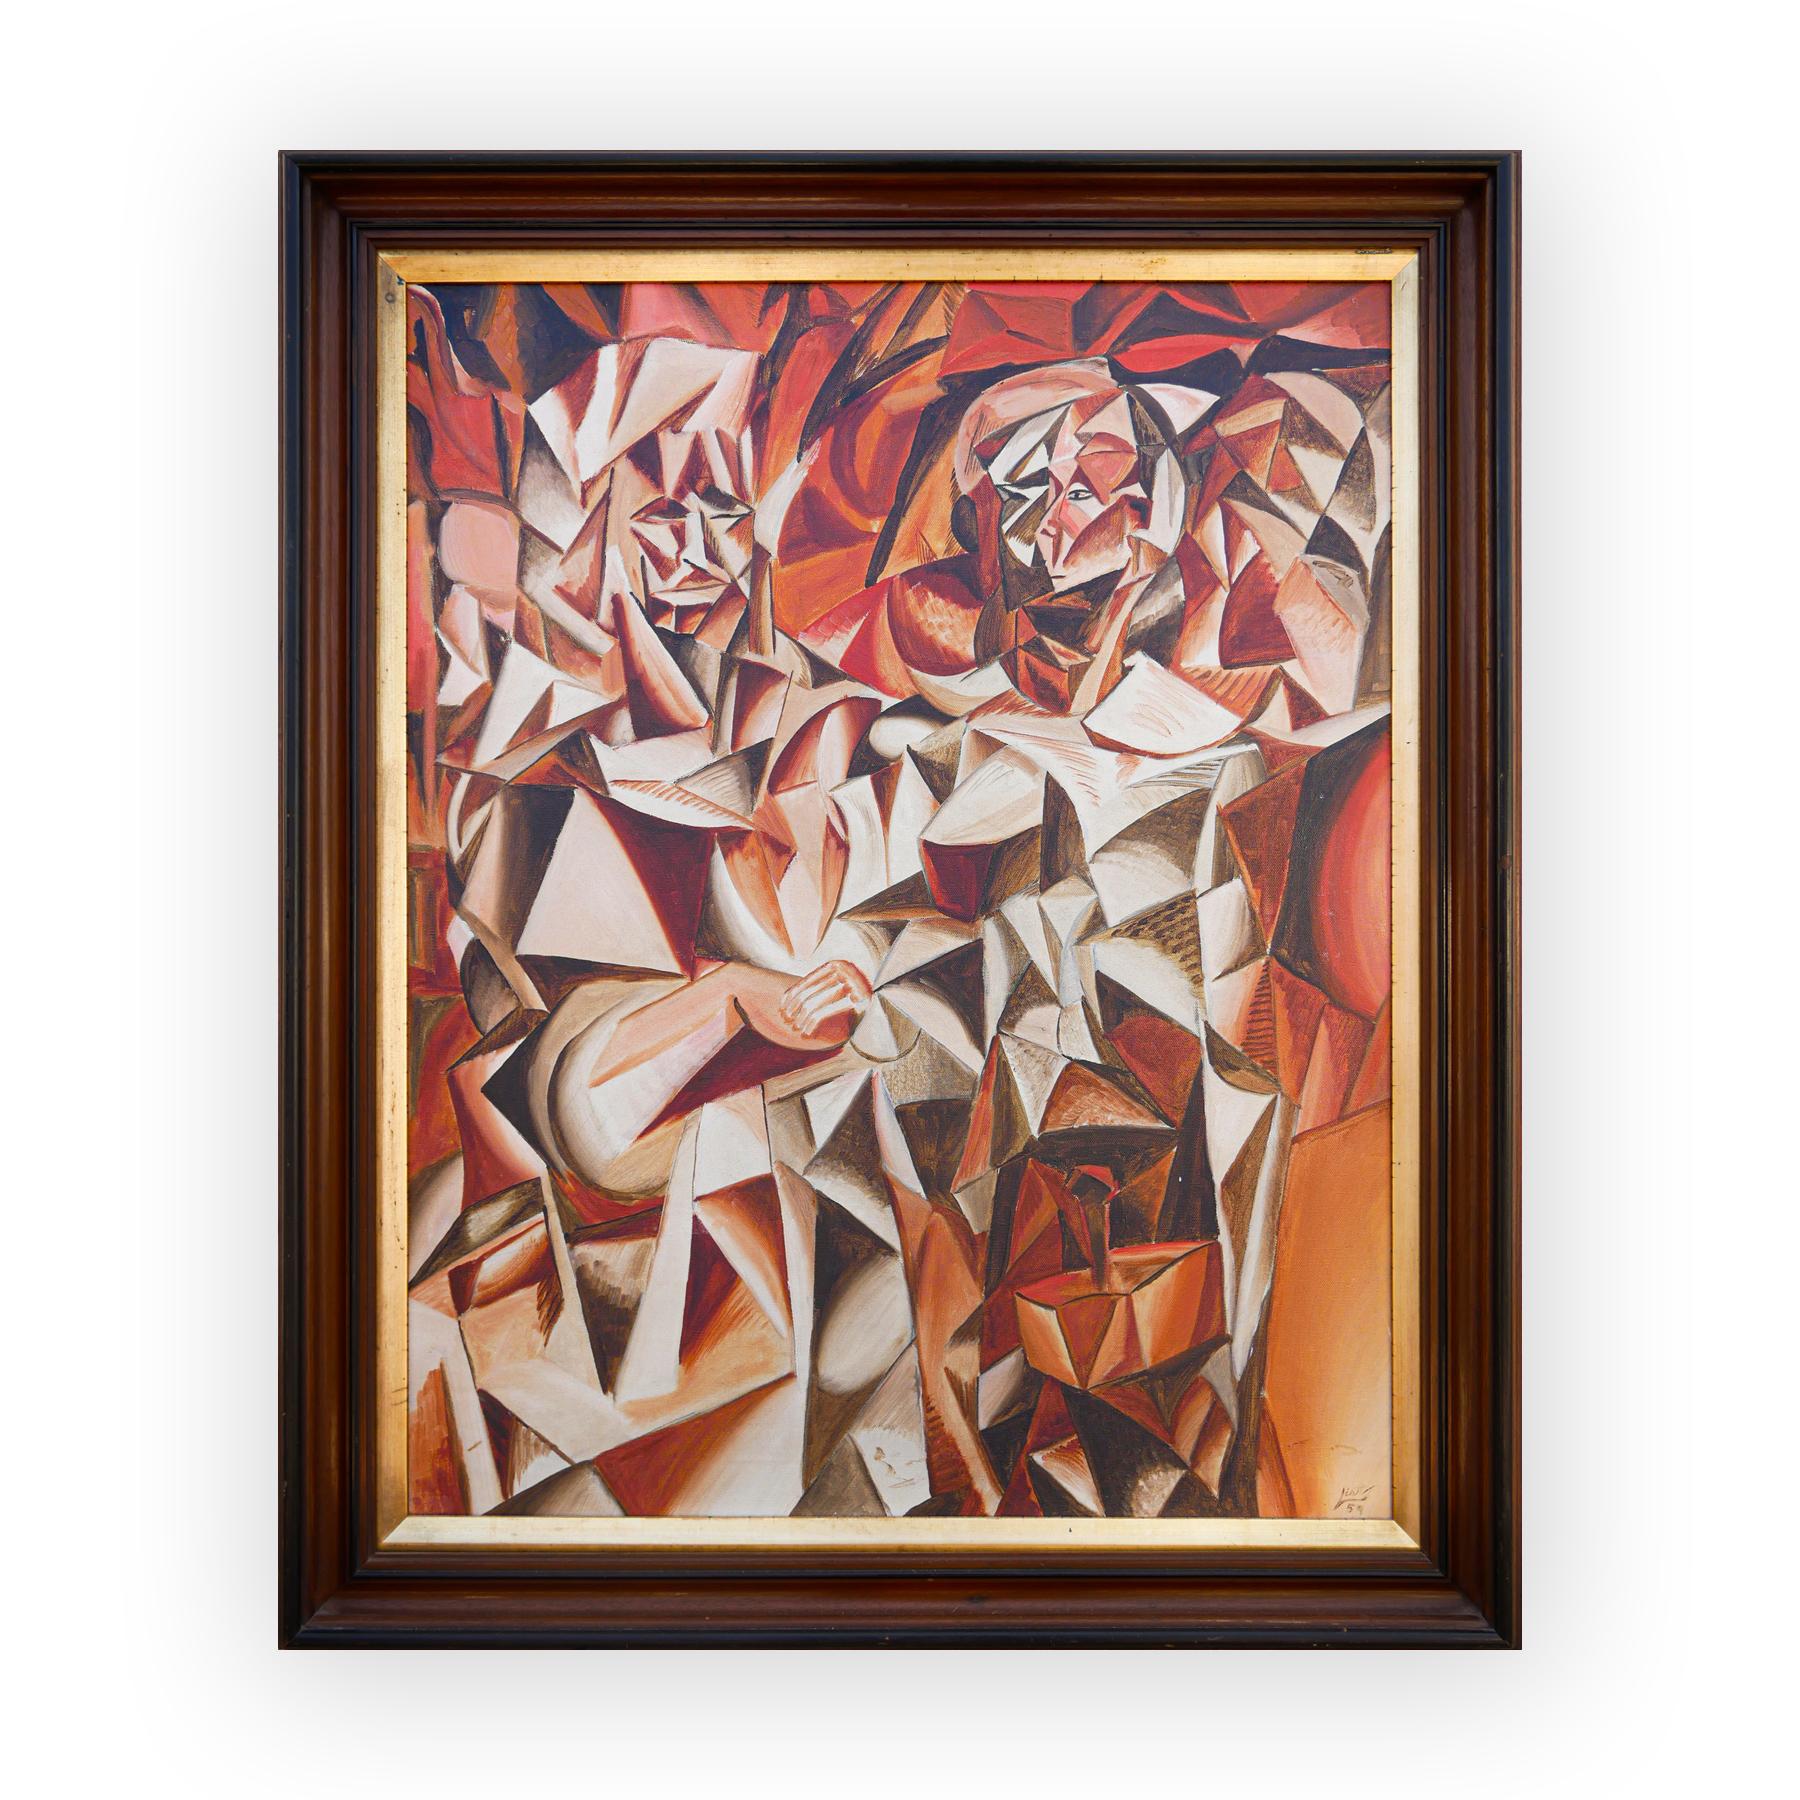 Orange, red, and brown abstract cubist painting with two human figures by artist Roy List. Framed in a beautiful wooden frame. Signed and dated by the artist at the back. 

Dimensions Without Frame: H 30.13 in. x W 24 in.